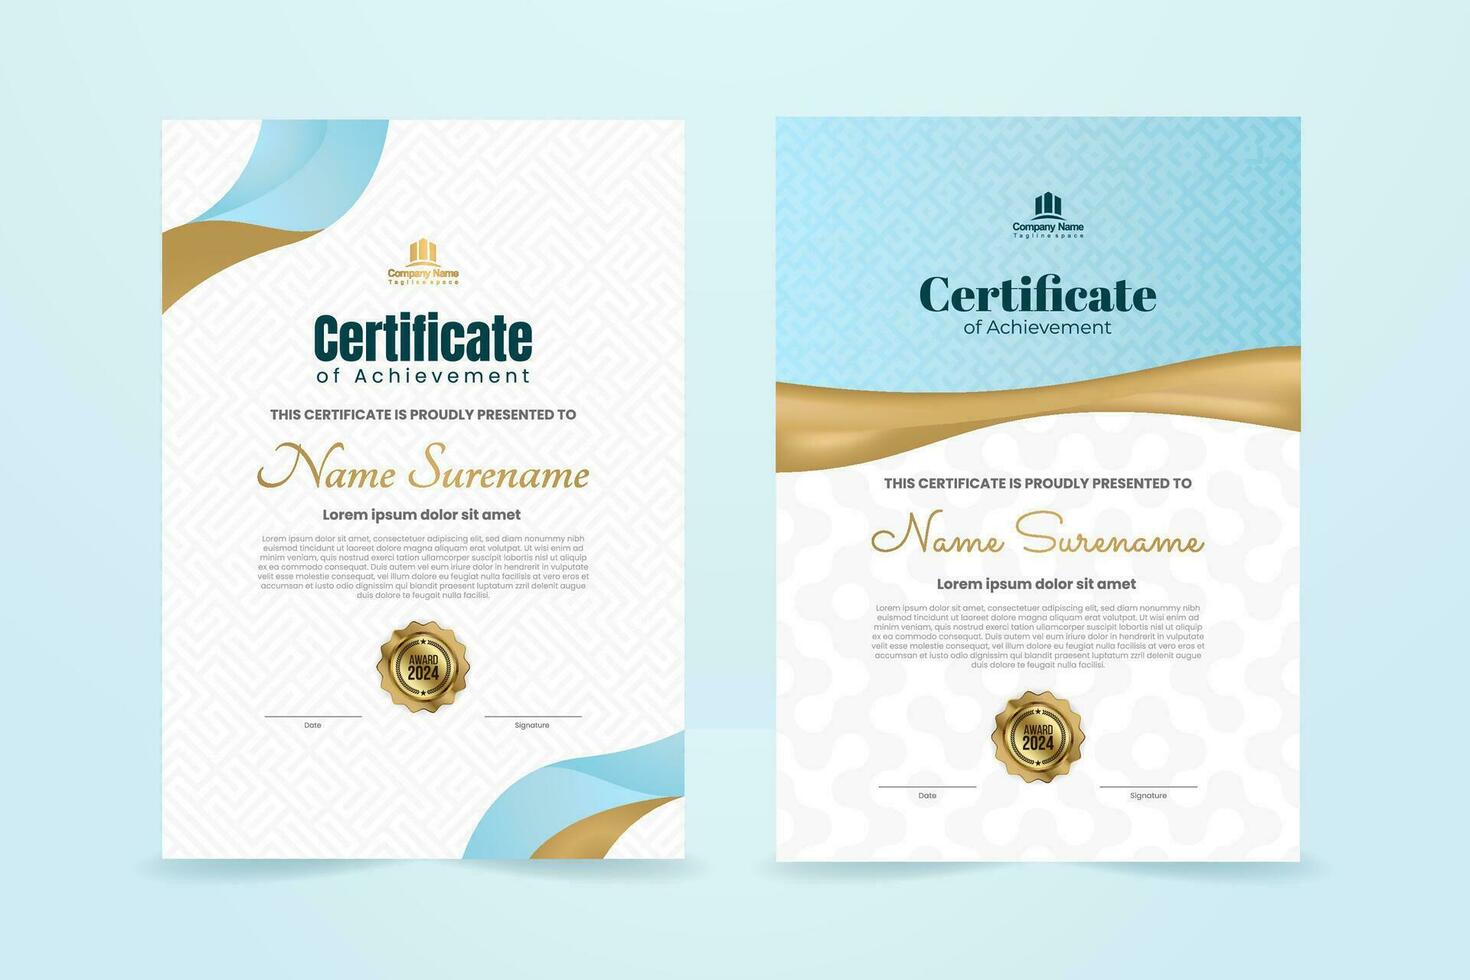 Elegant Luxury Certificate Template Design with Ocean Blue and Golden Ornament. Vector Illustration